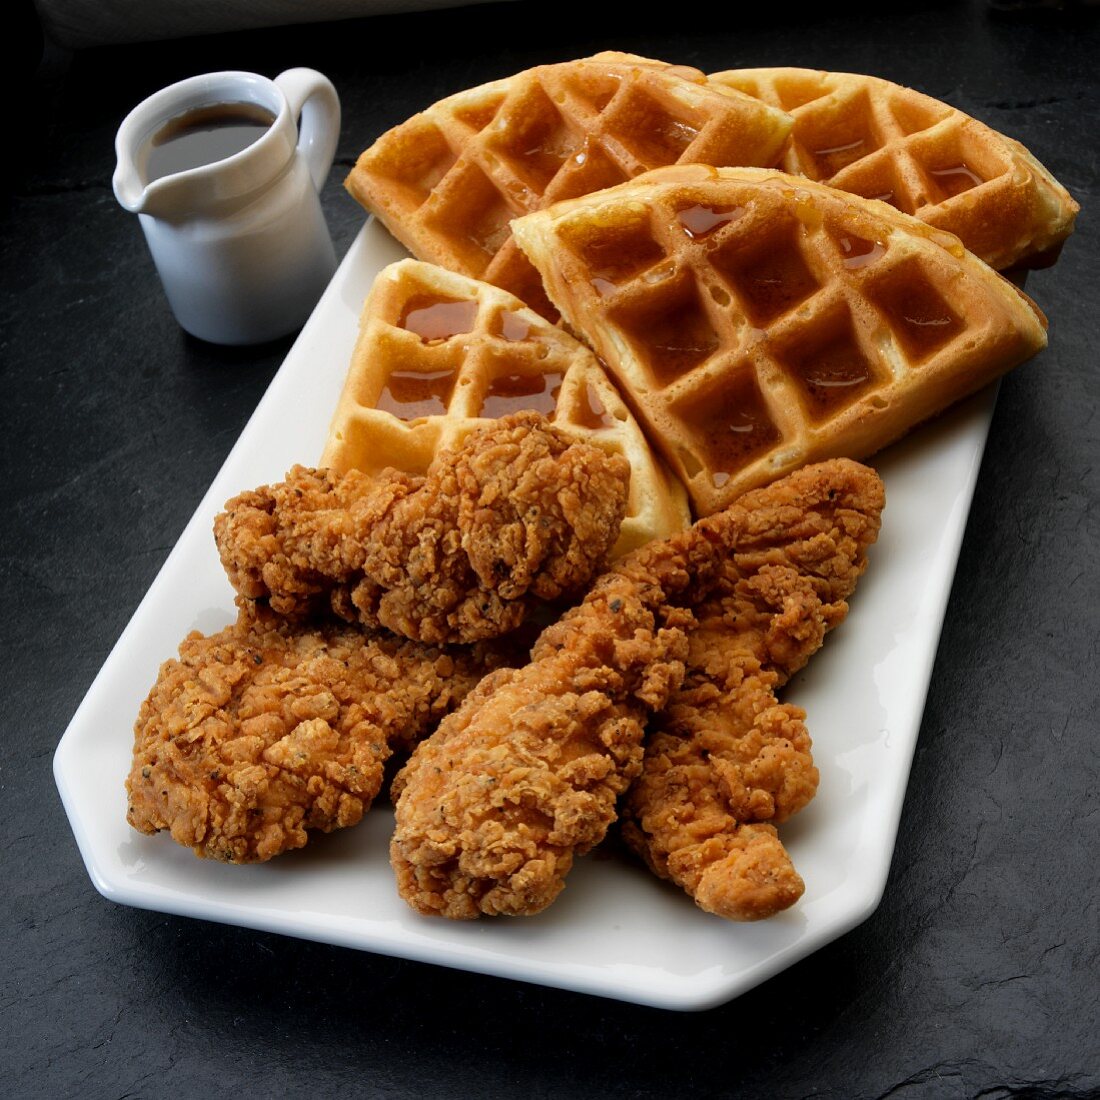 Fried chicken in breadcrumbs with syrup waffles